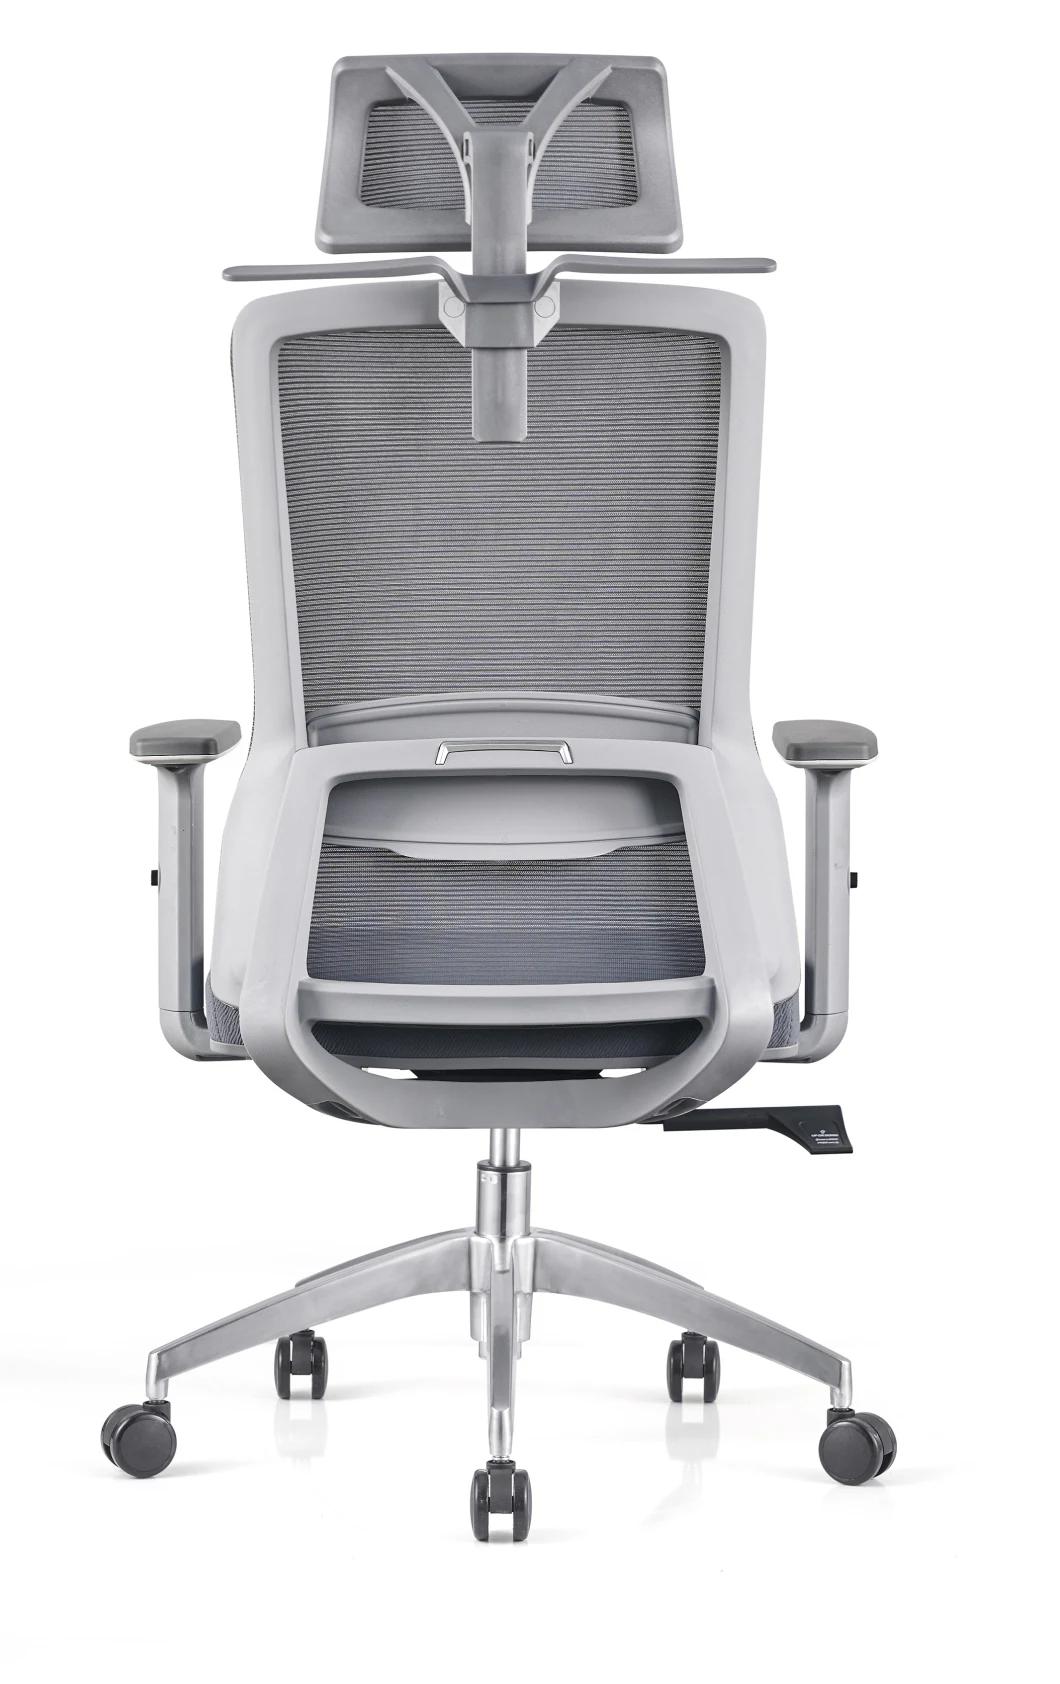 Exquisite Gray New Material and Fiber Frame Mesh Chairs with Adjustable Armrest Office Chairs 